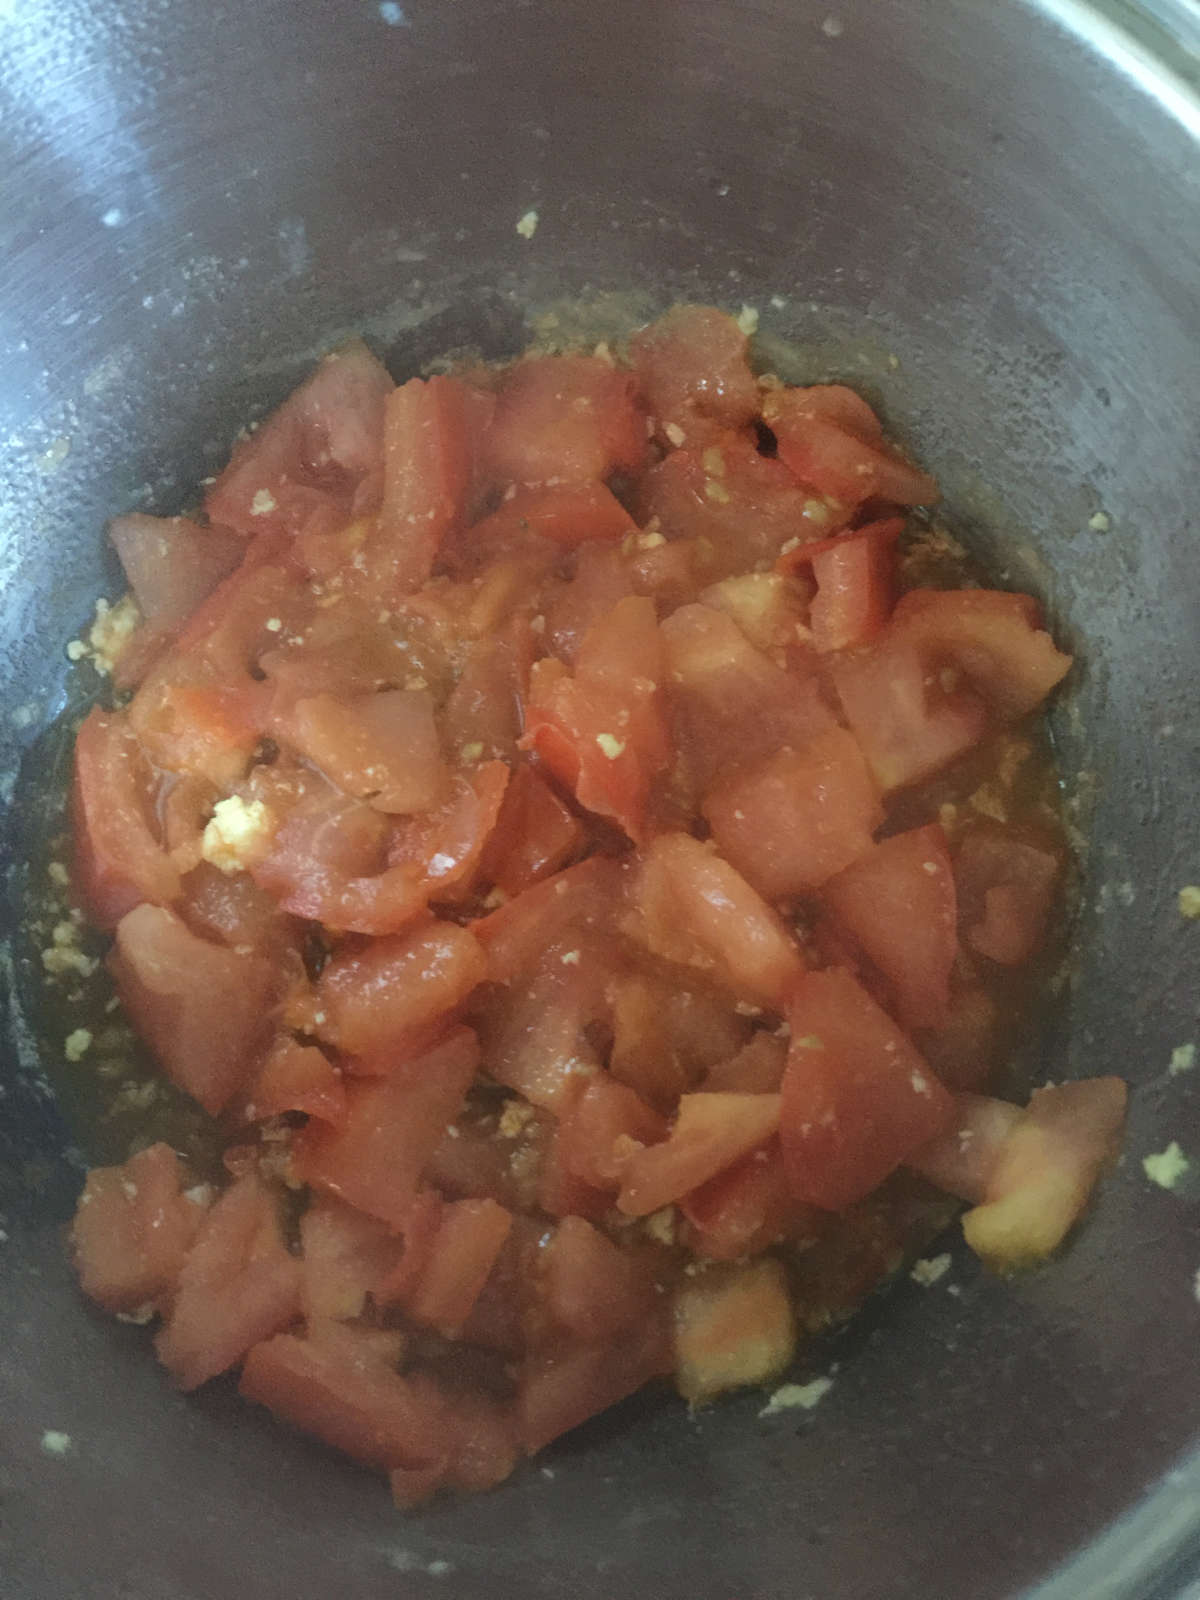 Tomato chunks cooked soft in wok